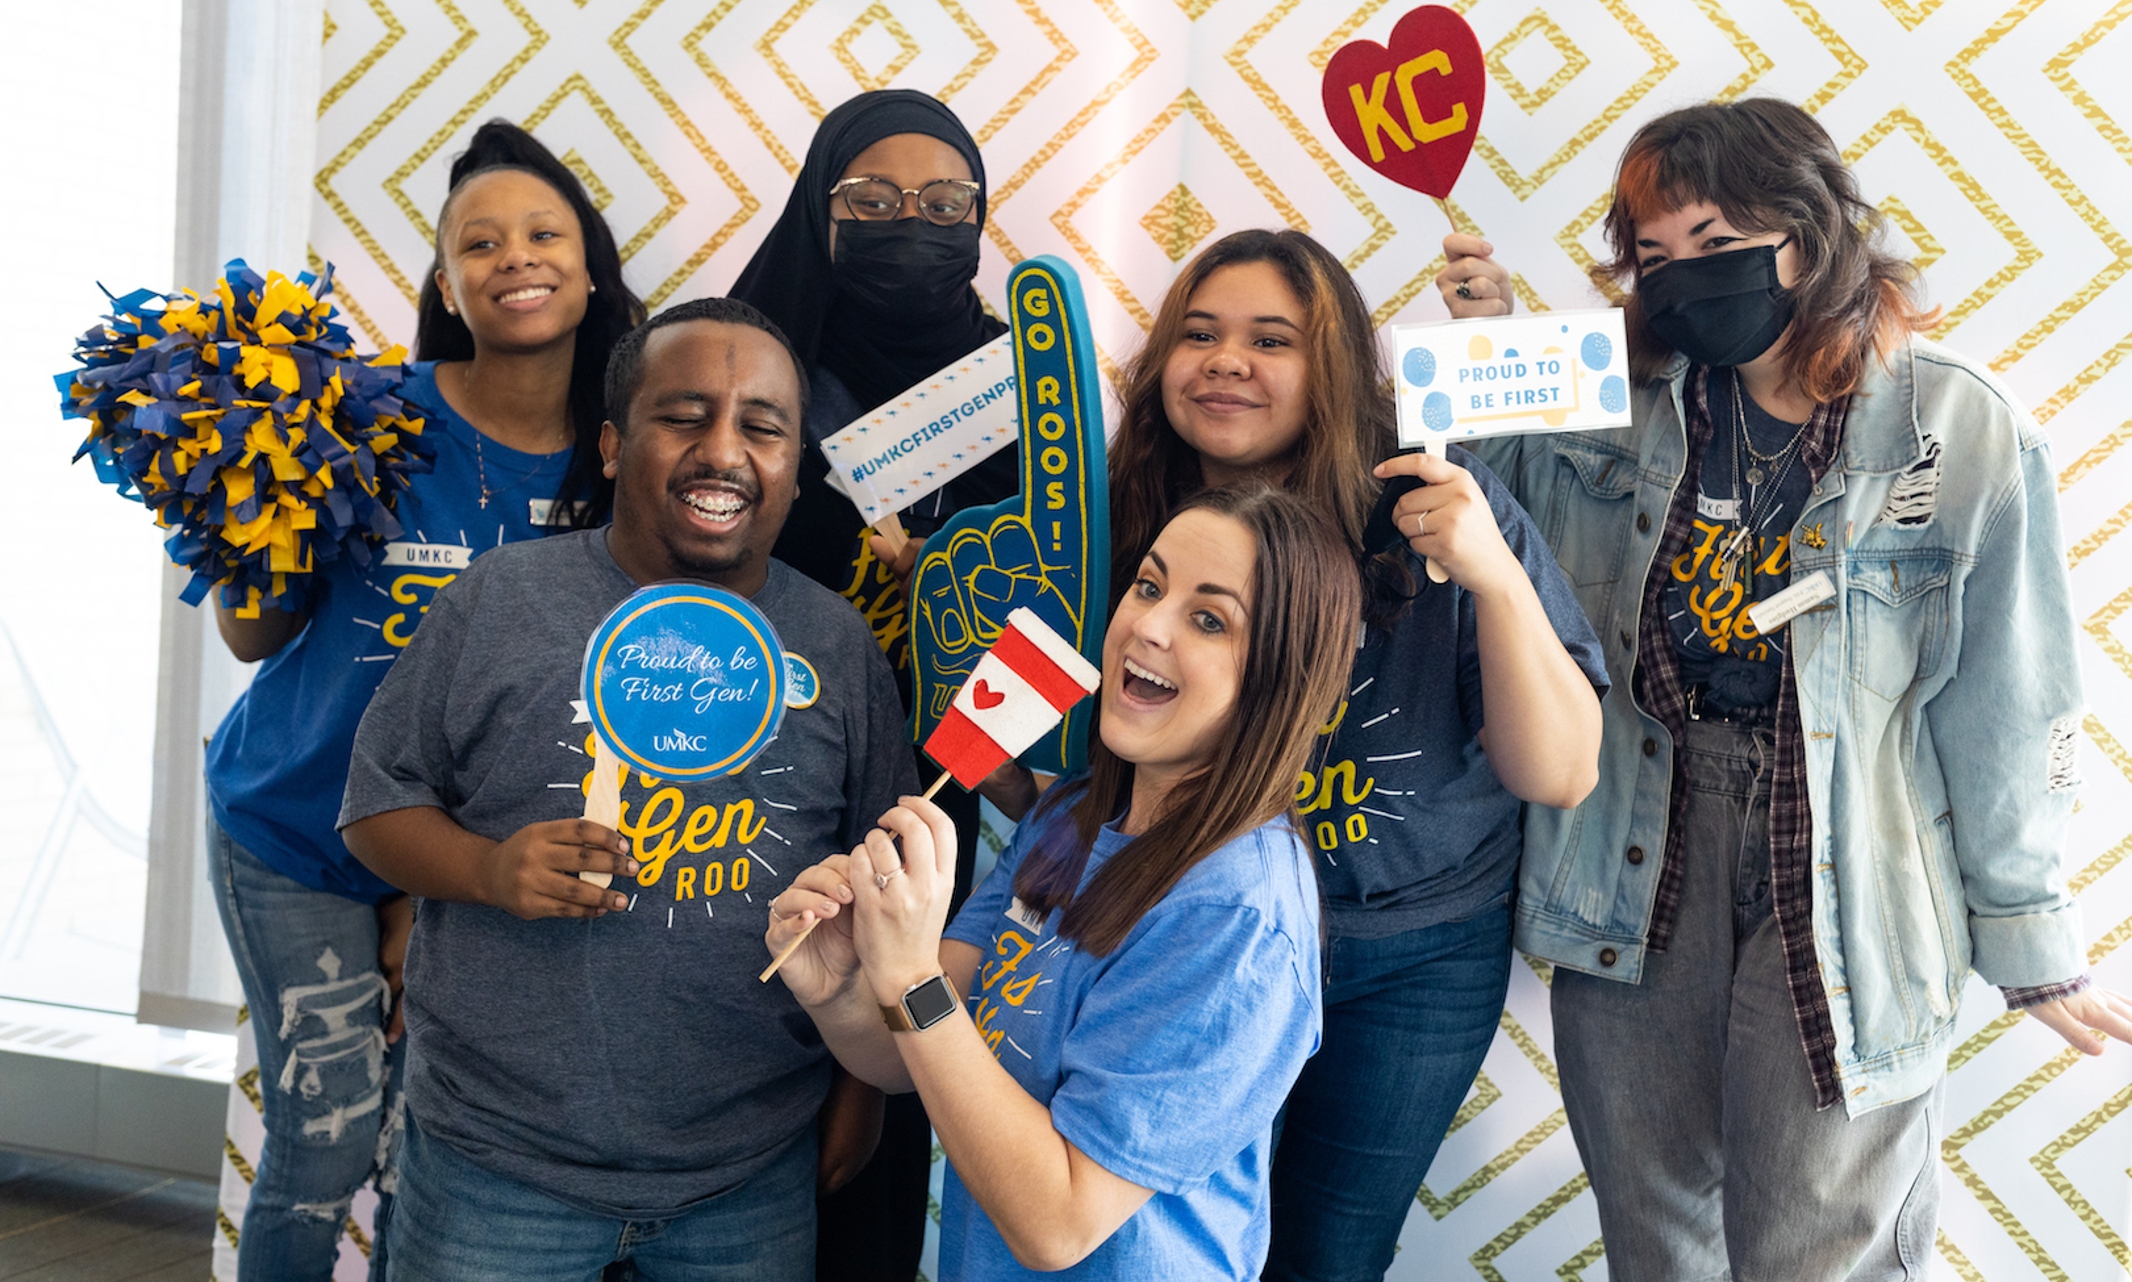 Students and mentors pose together with props in the photobooth at Student Union.